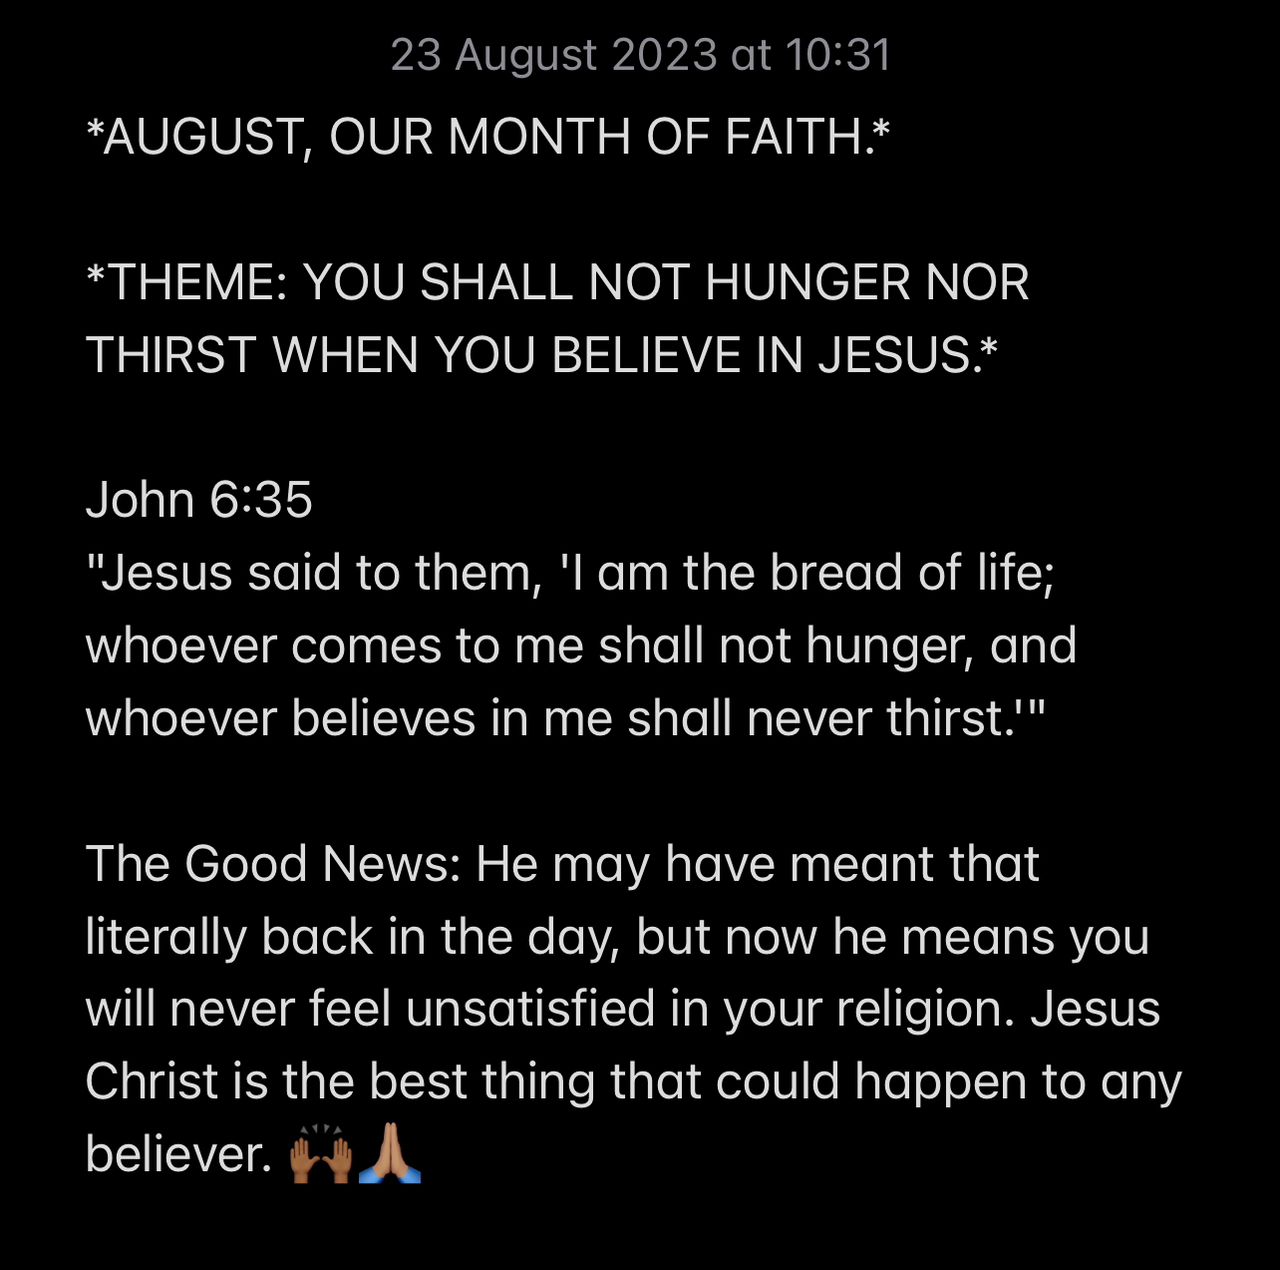 YOU SHALL NOT HUNGER NOR THIRST WHEN YOU BELIEVE IN JESUS.